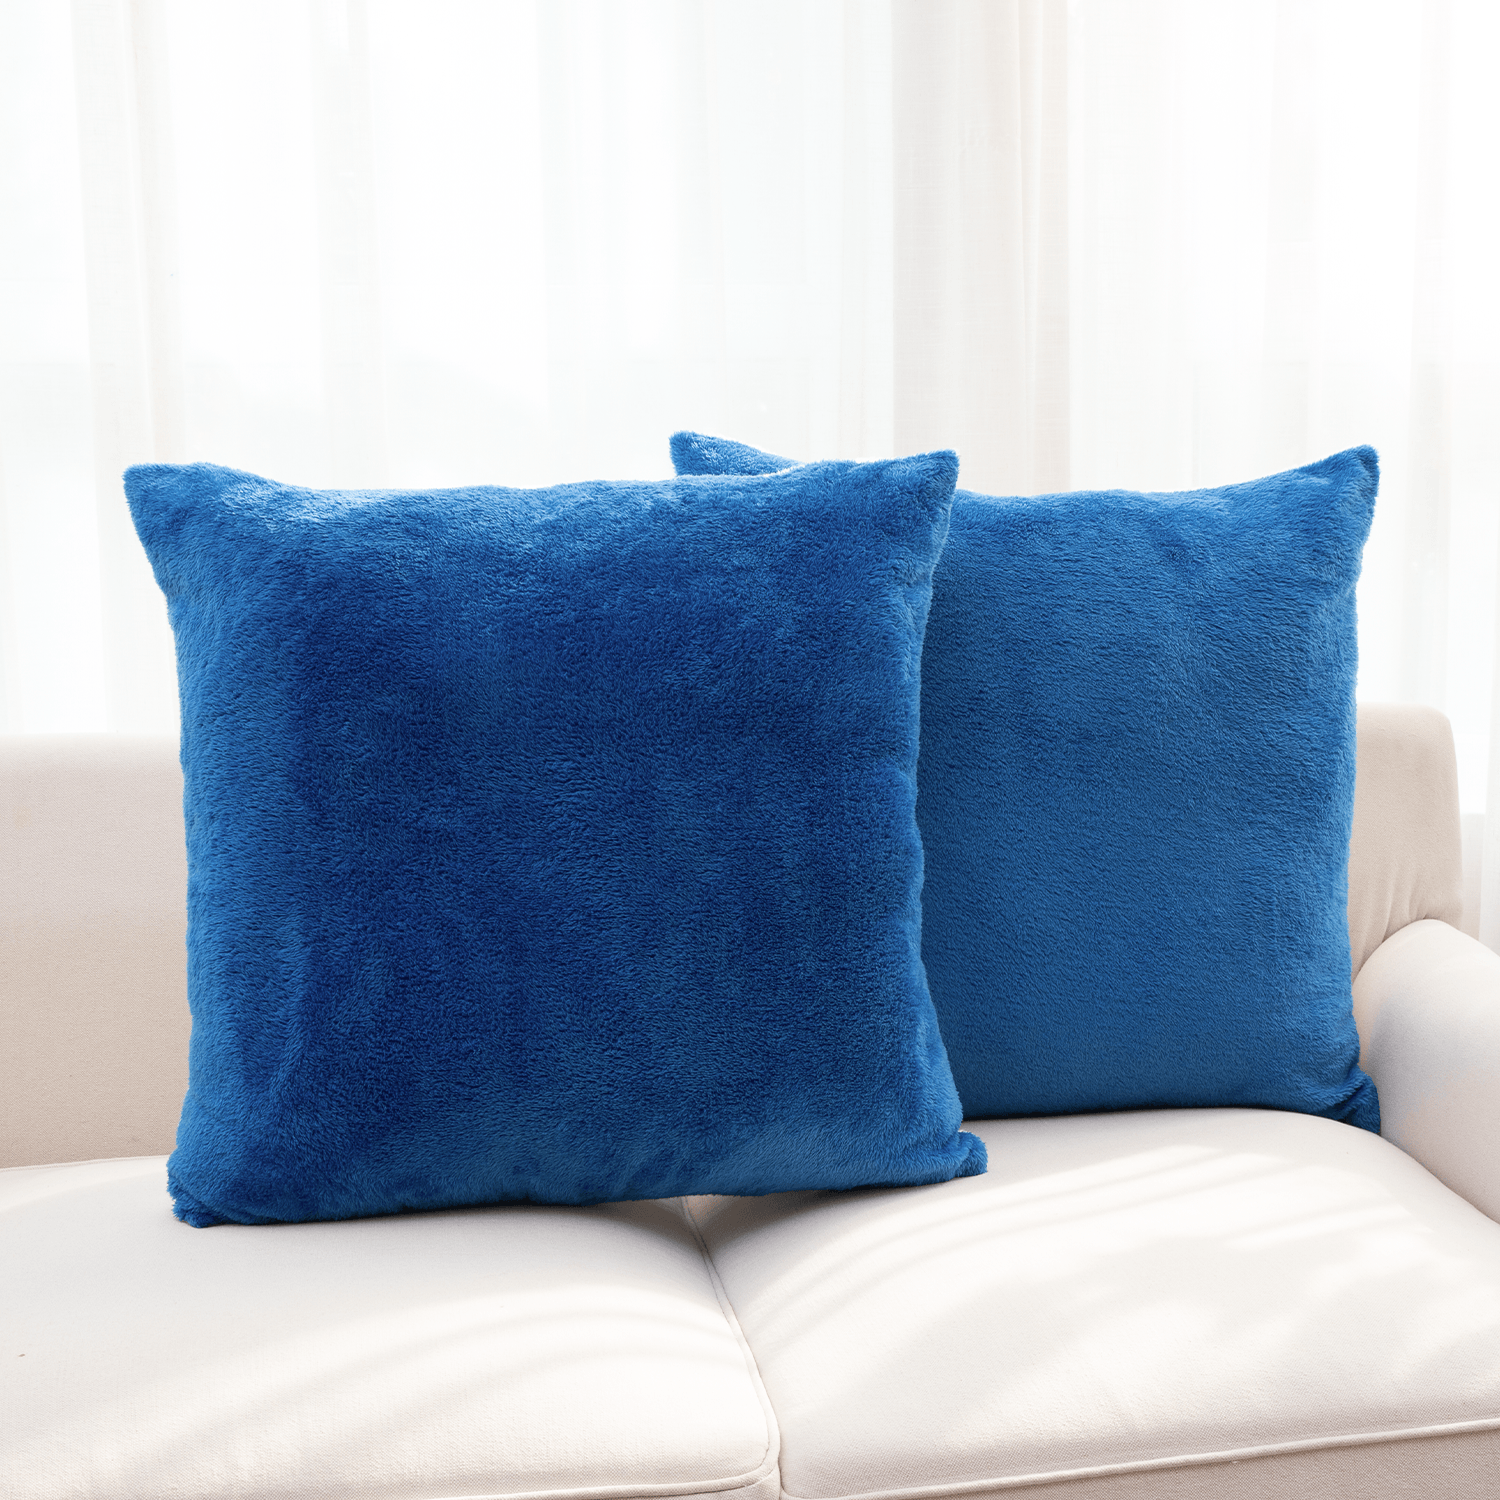 https://cdn.shopify.com/s/files/1/2091/6511/products/cheer-collection-microsherpa-throw-pillow-ultra-soft-and-fluffy-elegant-home-decor-velvet-stylish-accent-pillows-18-x-18-set-of-2-423288.png?v=1678133846